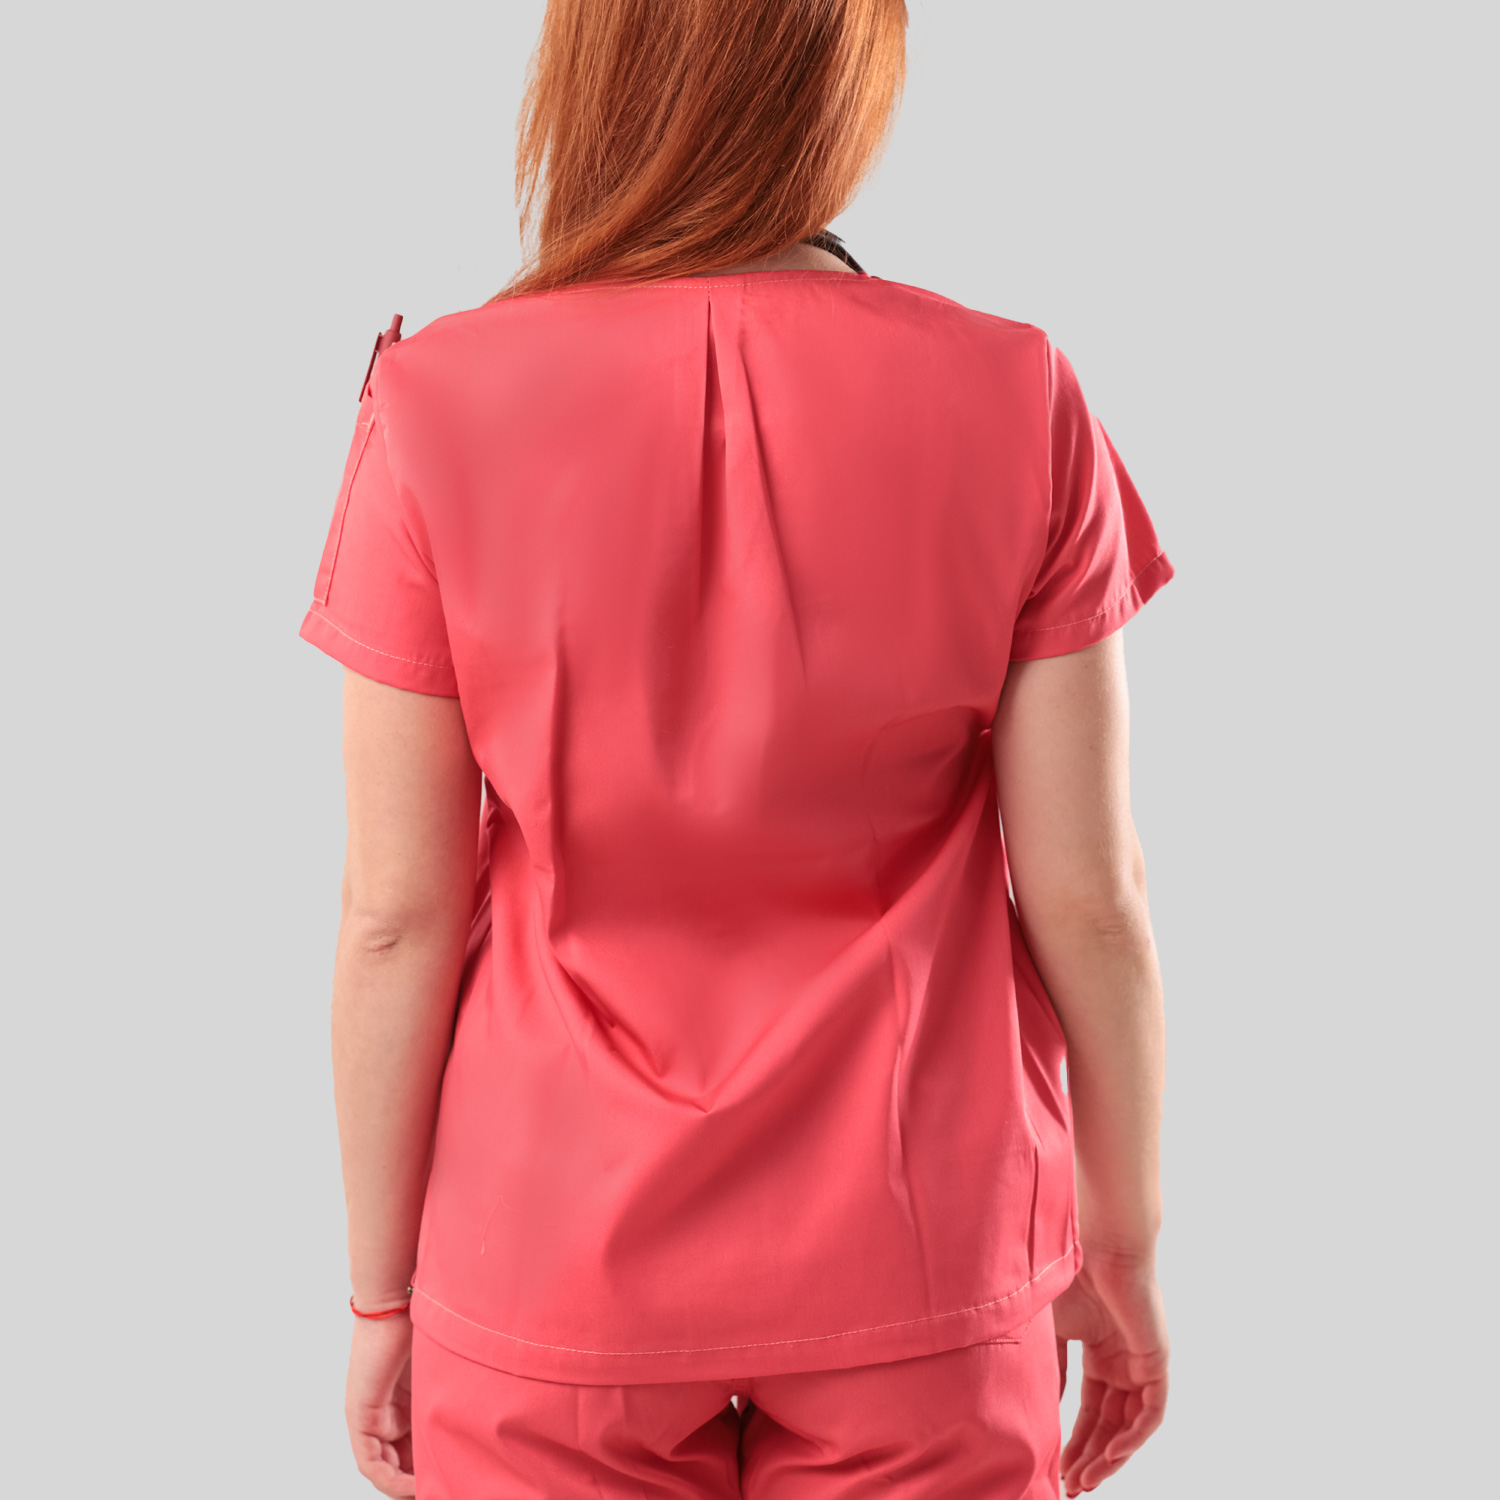 classic edition -2.0- corail- top- 2 pockets